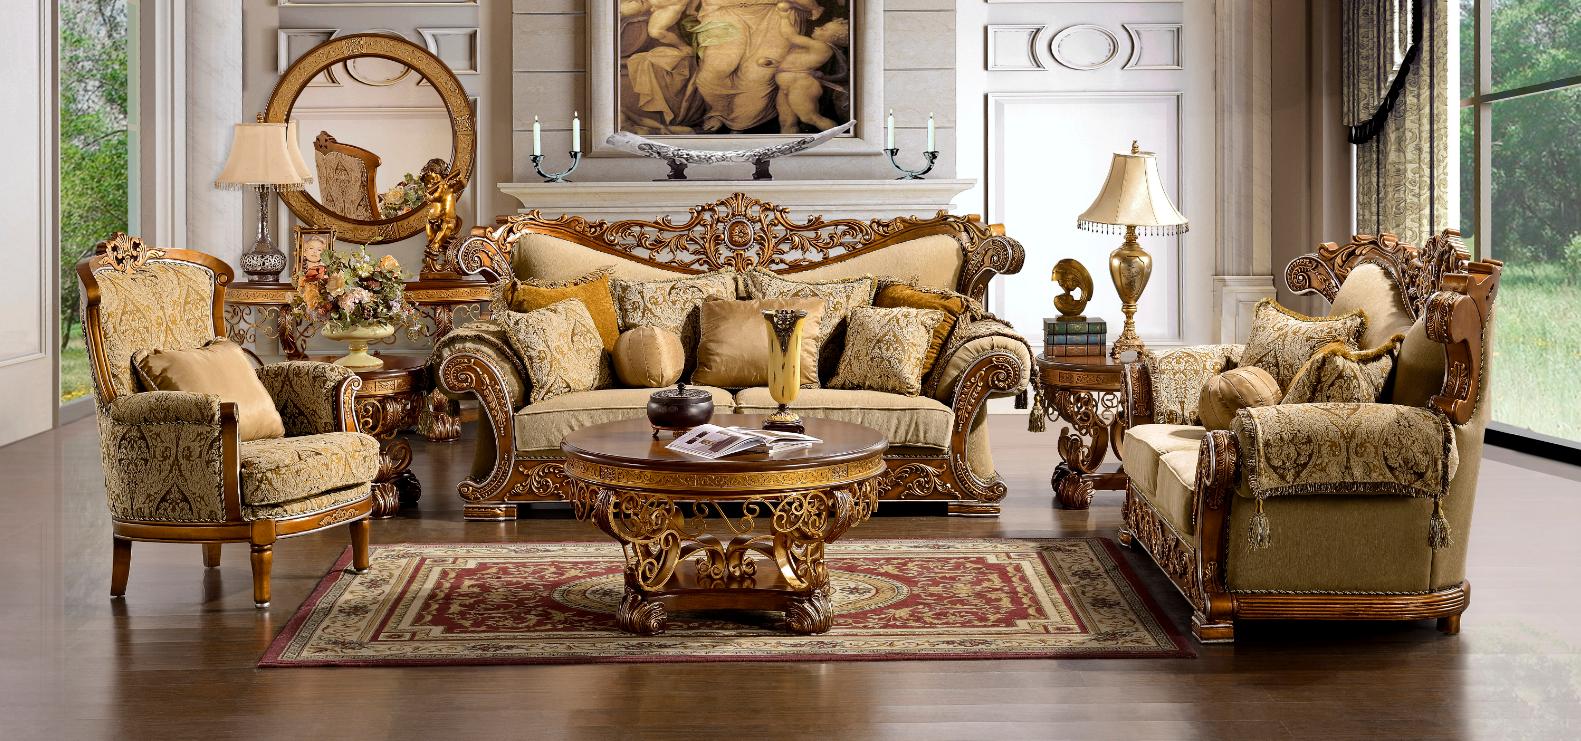 

    
HD-369-SSET3 Golden Tan Chenille Sofa Set 3Pcs Carved Wood Traditional Homey Design HD-369
